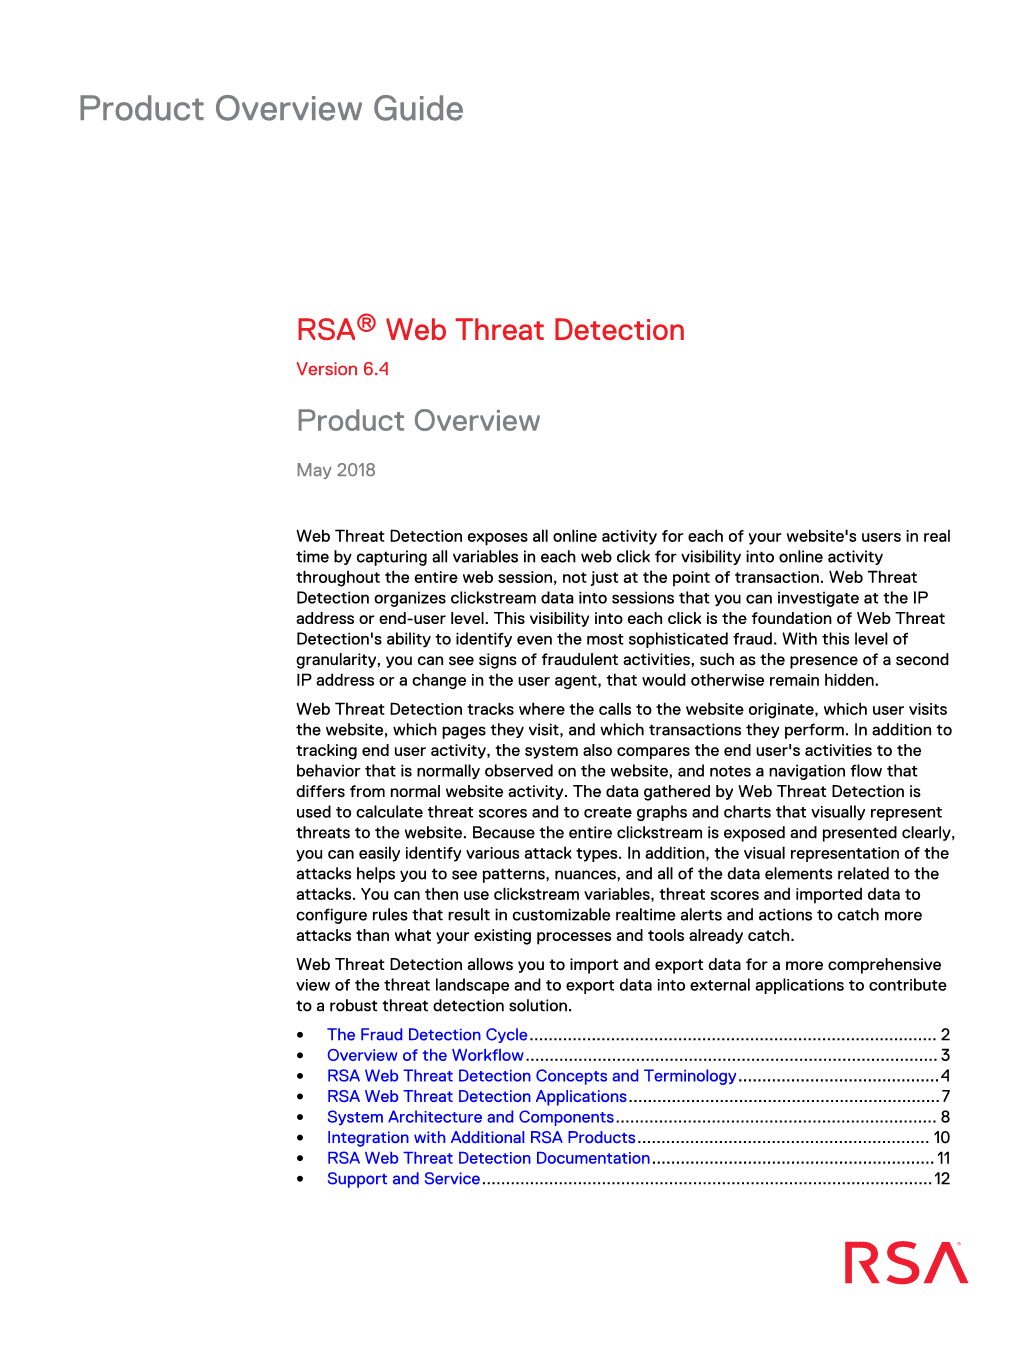 RSA Web Threat Detection Product Overview Guide